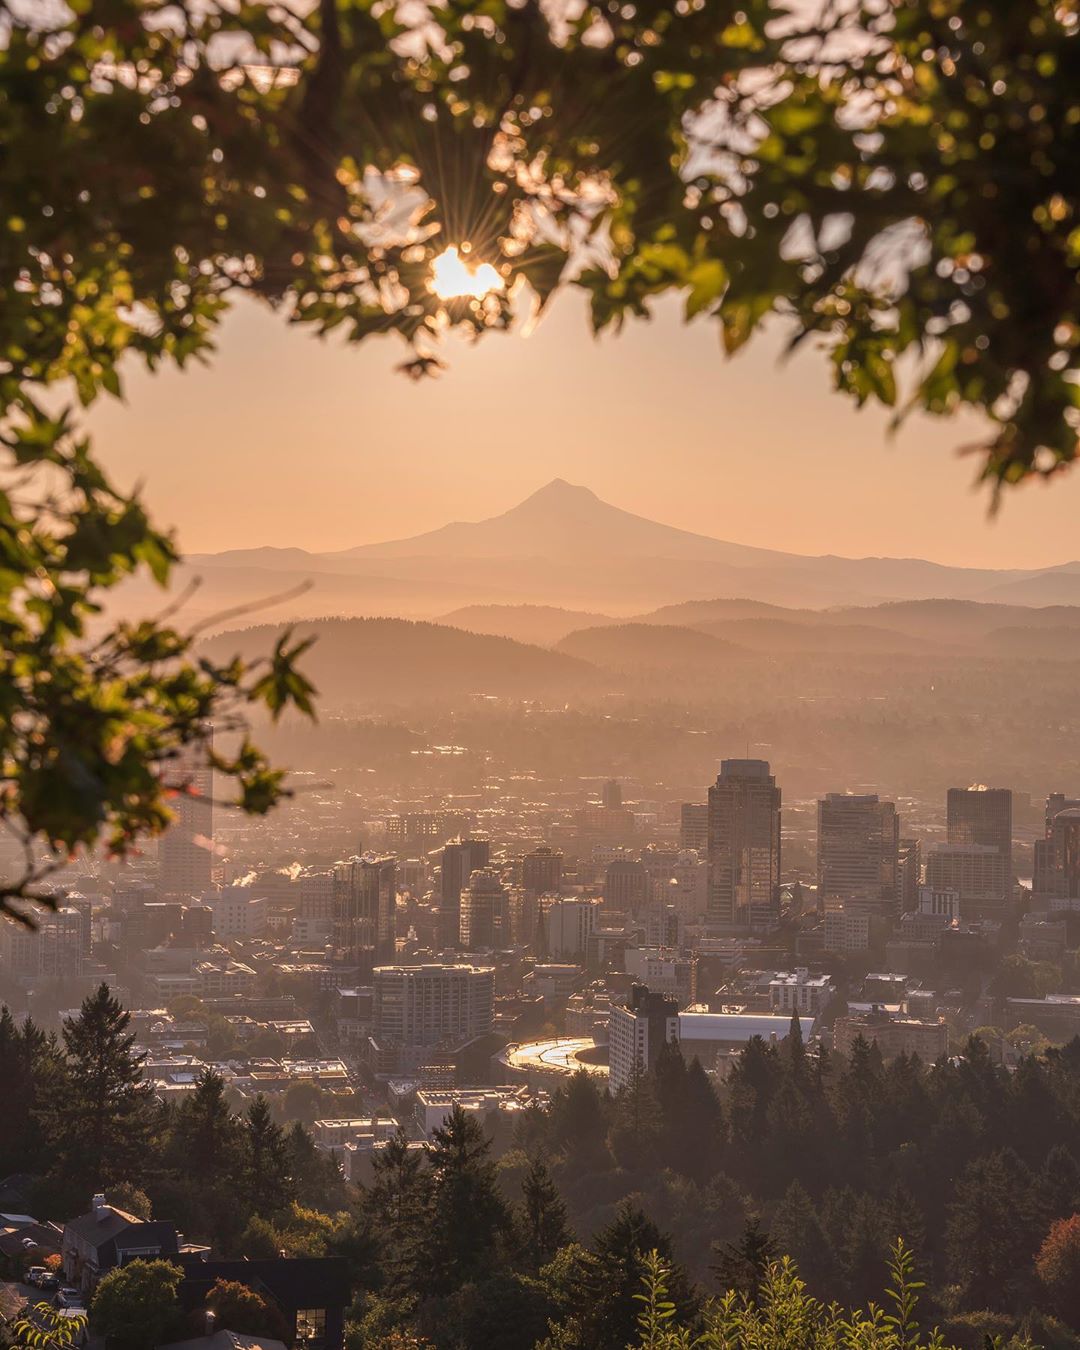 Skyline of tall buildings and mountains during sun rise in Portland, OR. Photo by Instagram user @50shadesofpnw